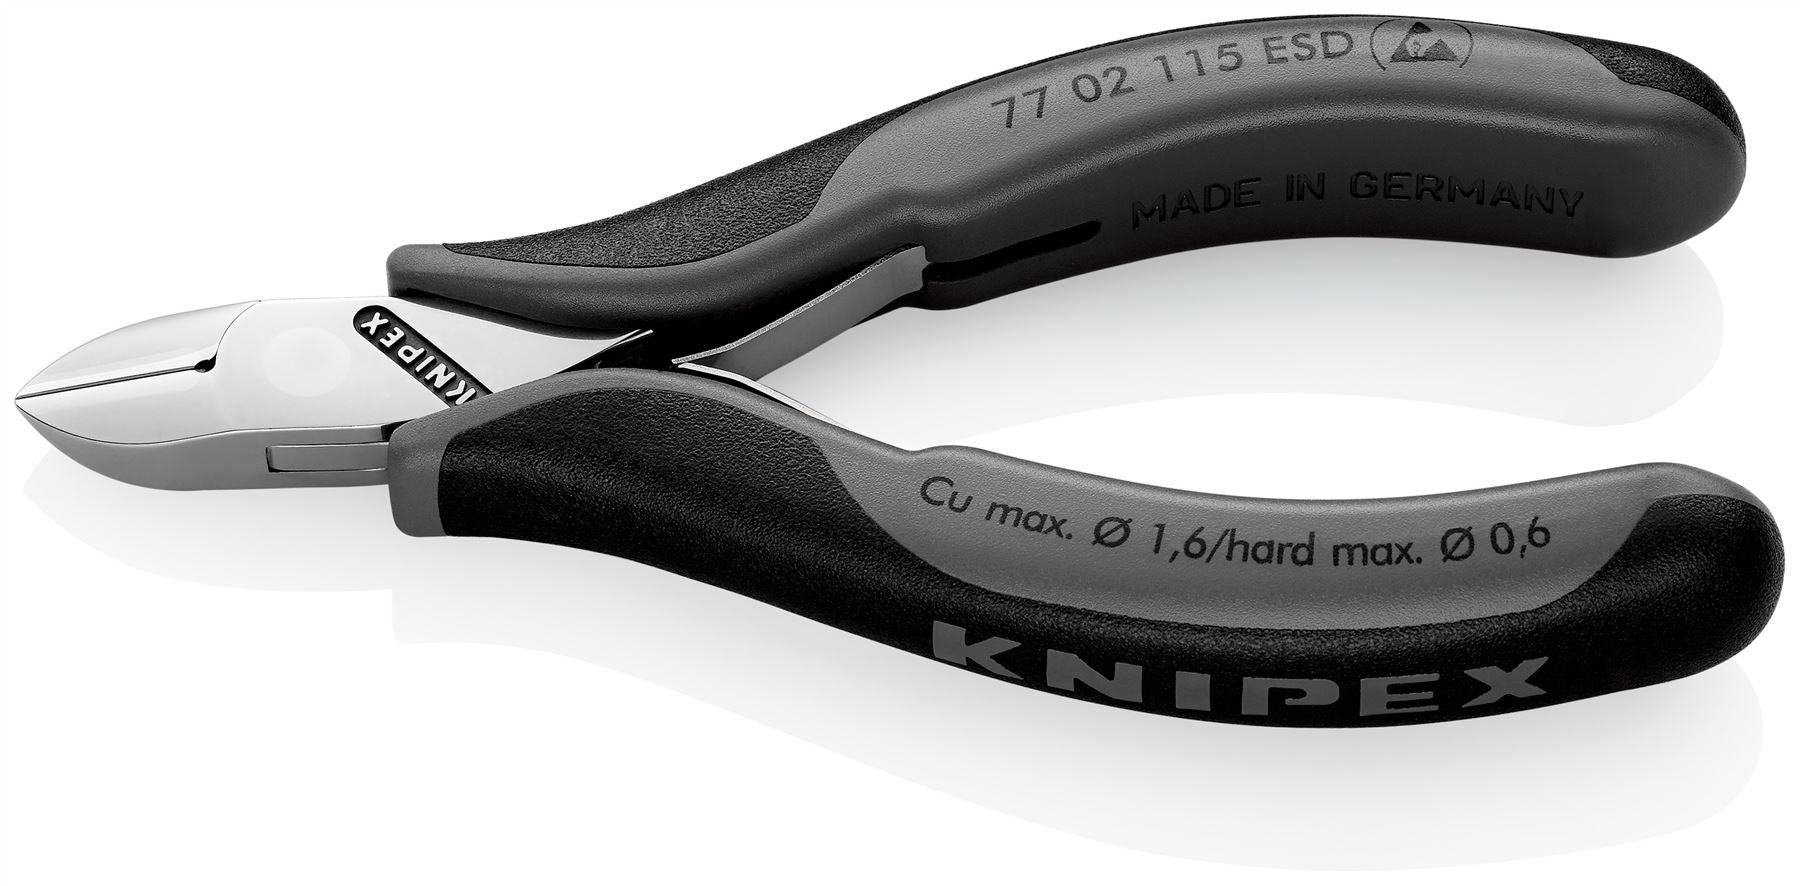 KNIPEX Electronics Diagonal Cutter Pliers with Carbide Cutting Edges 115mm Multi Component Grips 77 02 115 ESD